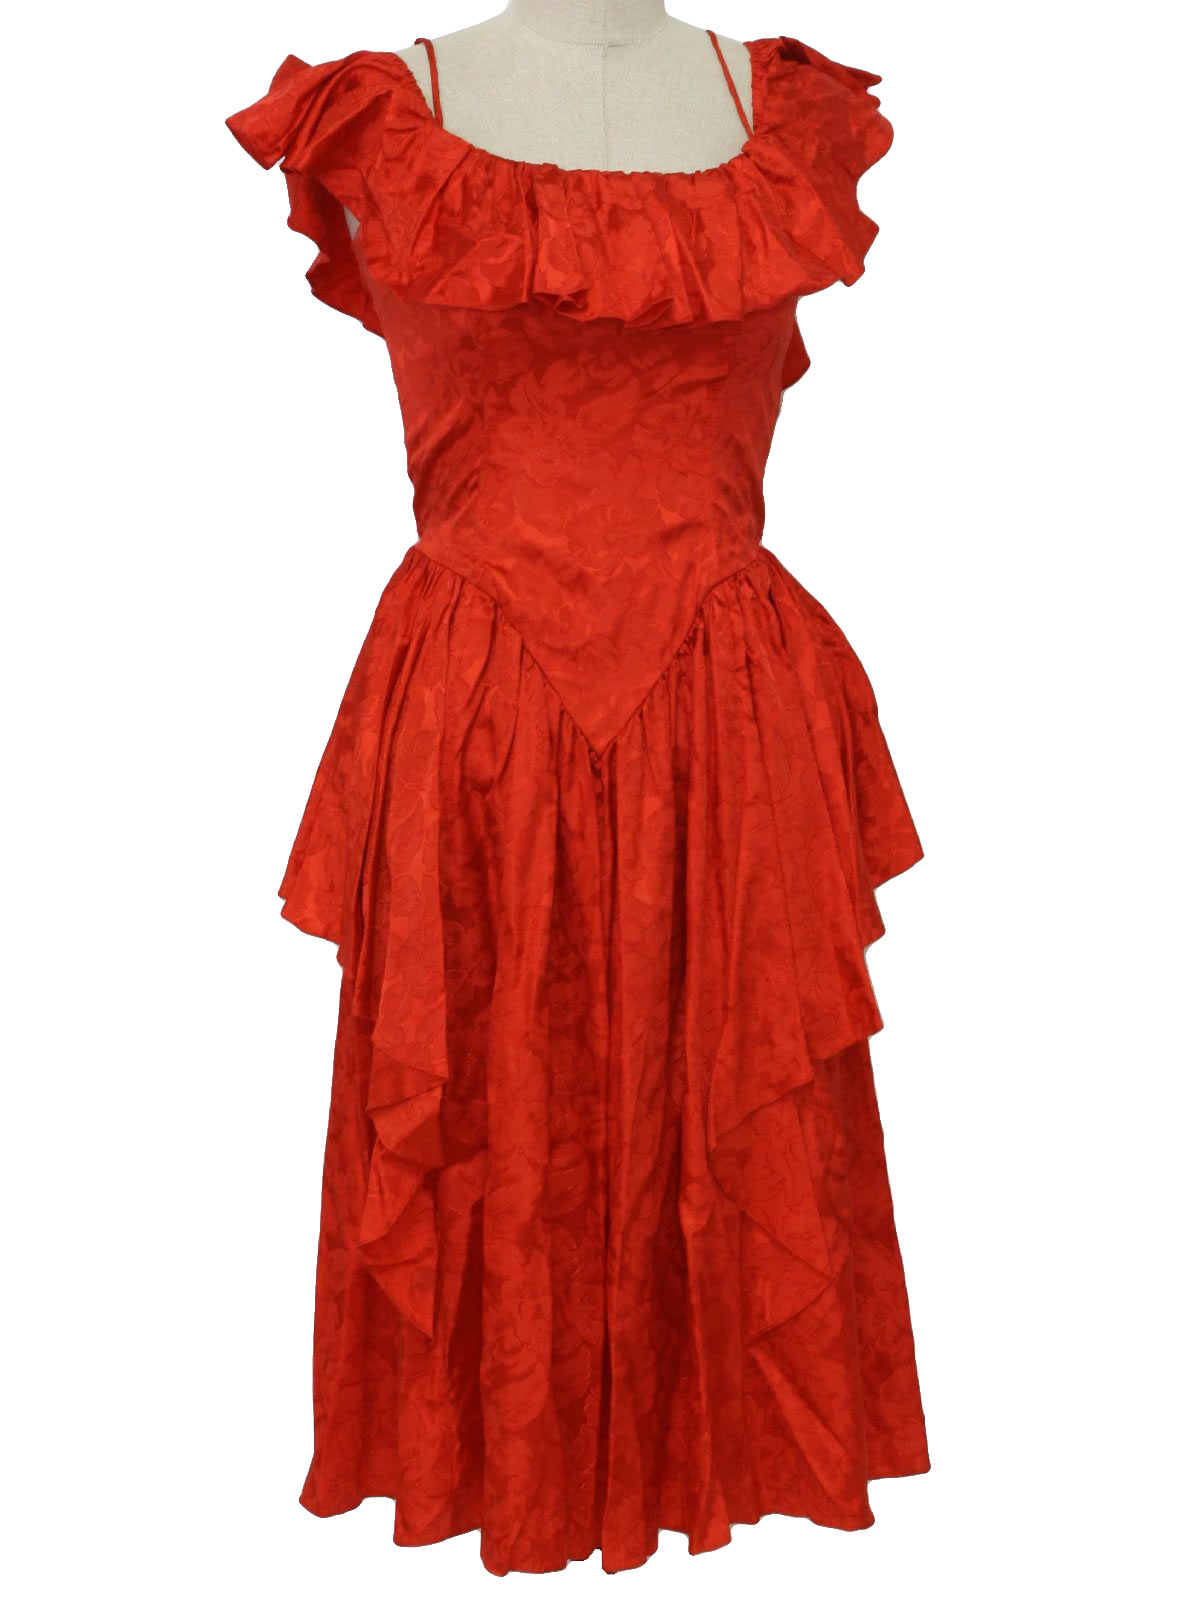 jcpenney totally 80s cocktail or prom dress 80s jcpenney womens red ...